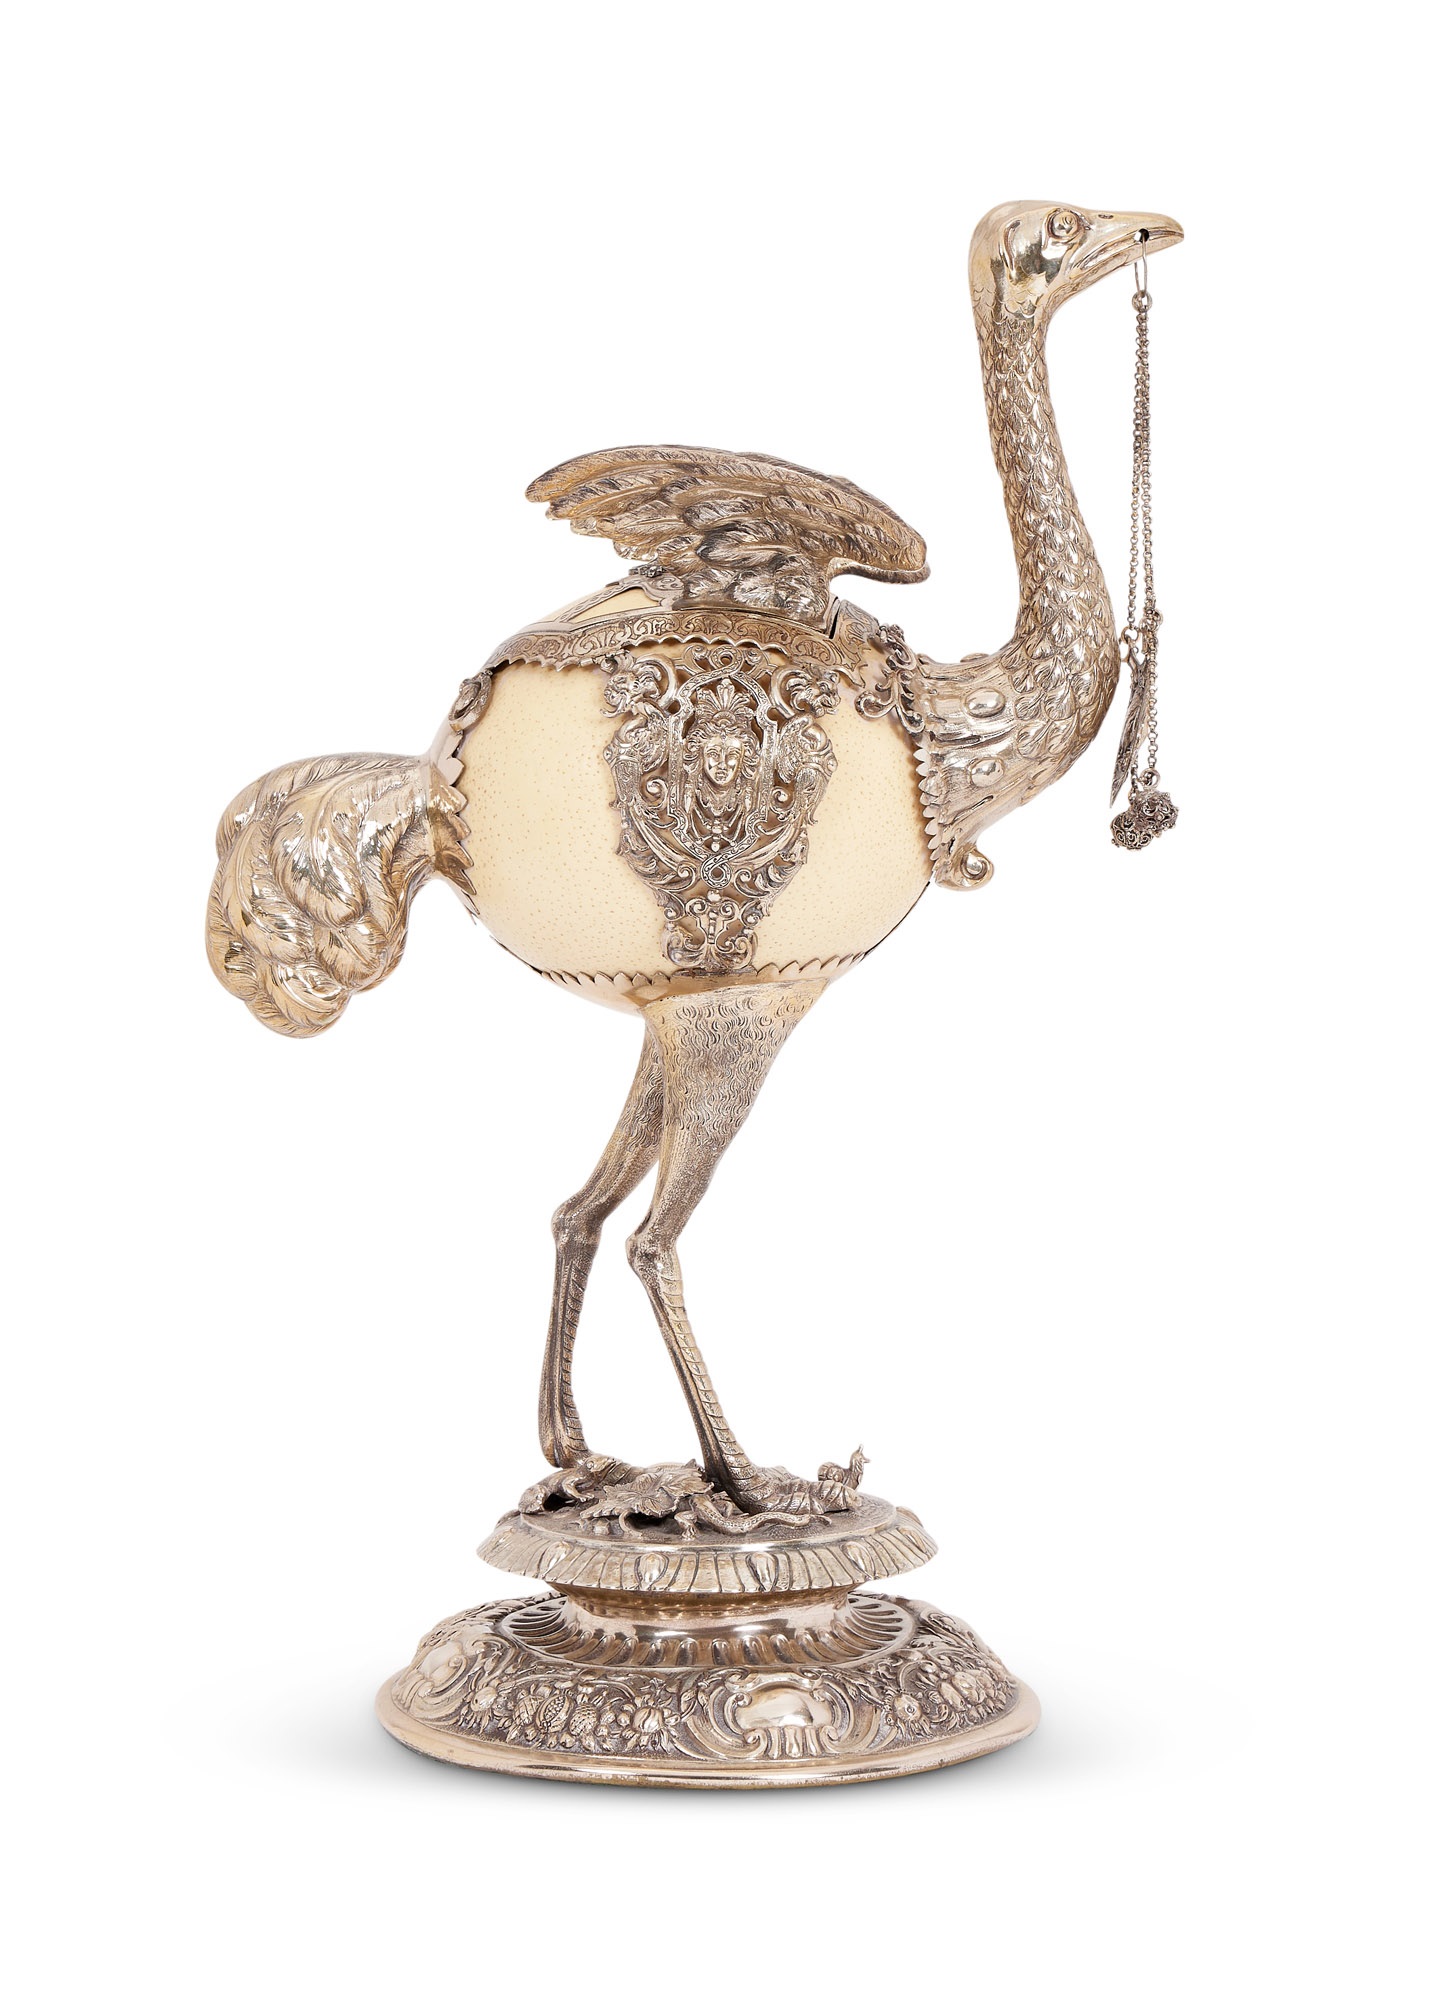 A LATE 19TH CENTURY SILVER MOUNTED OSTRICH EGG CUP AND COVER, PROBABLY HANAU - Image 8 of 10